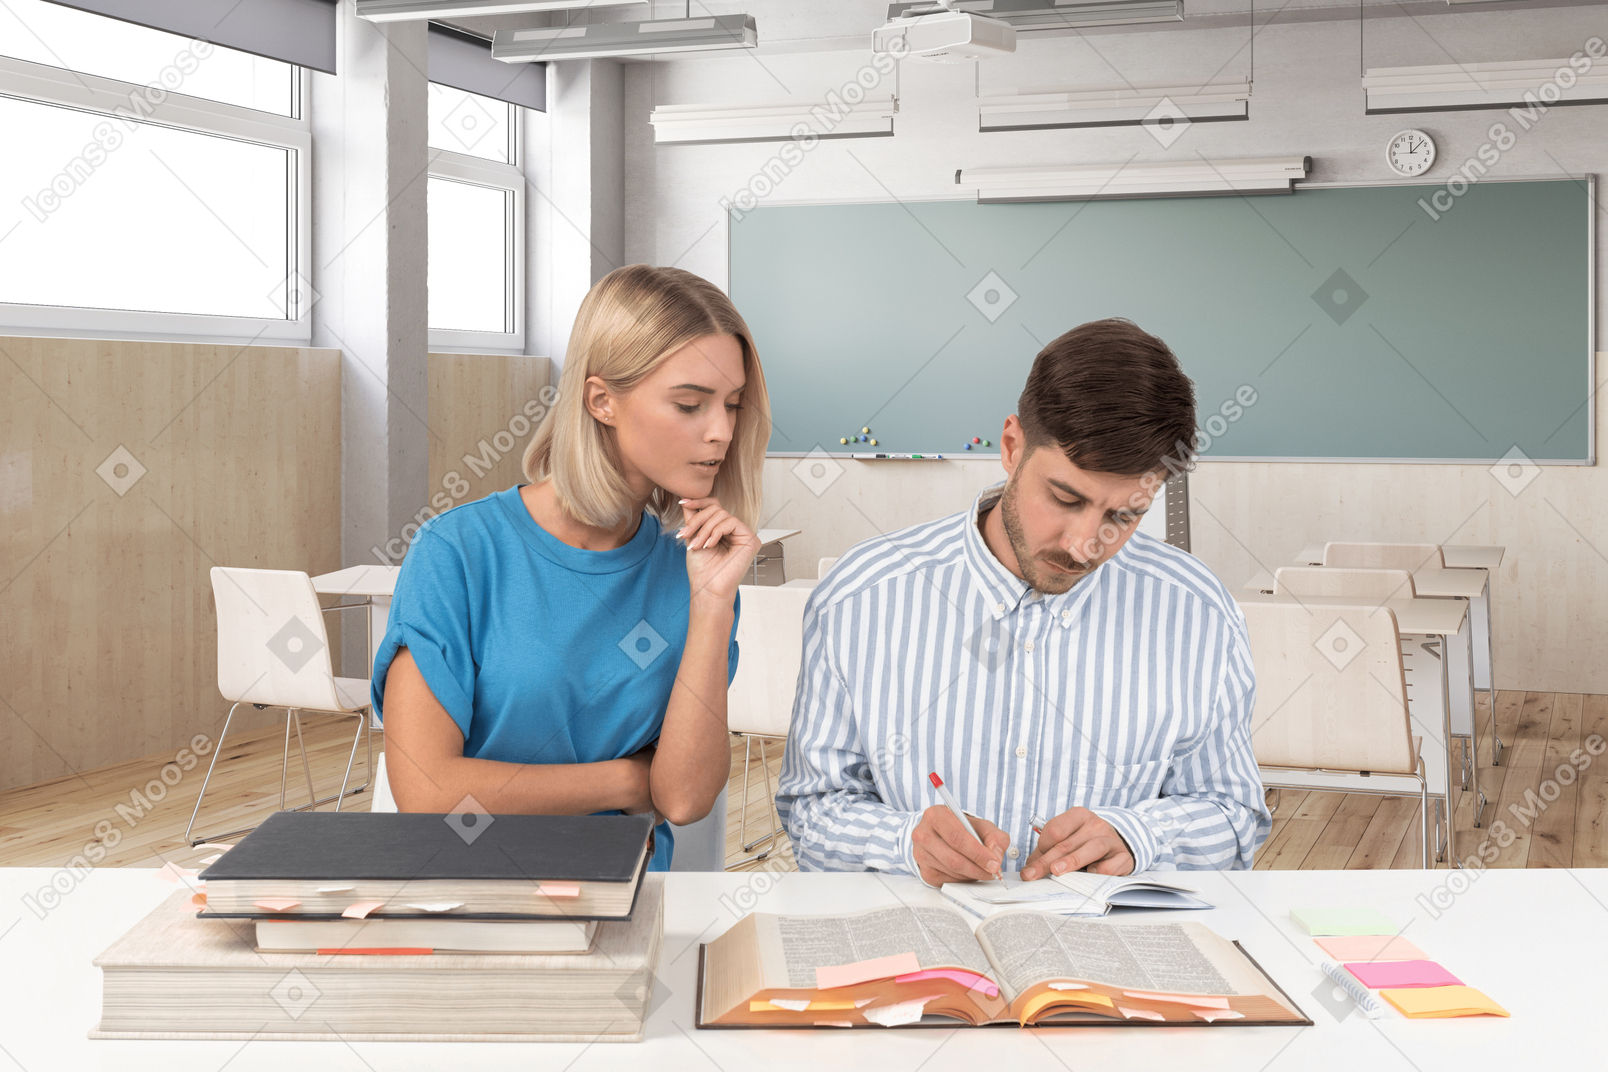 Man and woman studying in a classroom